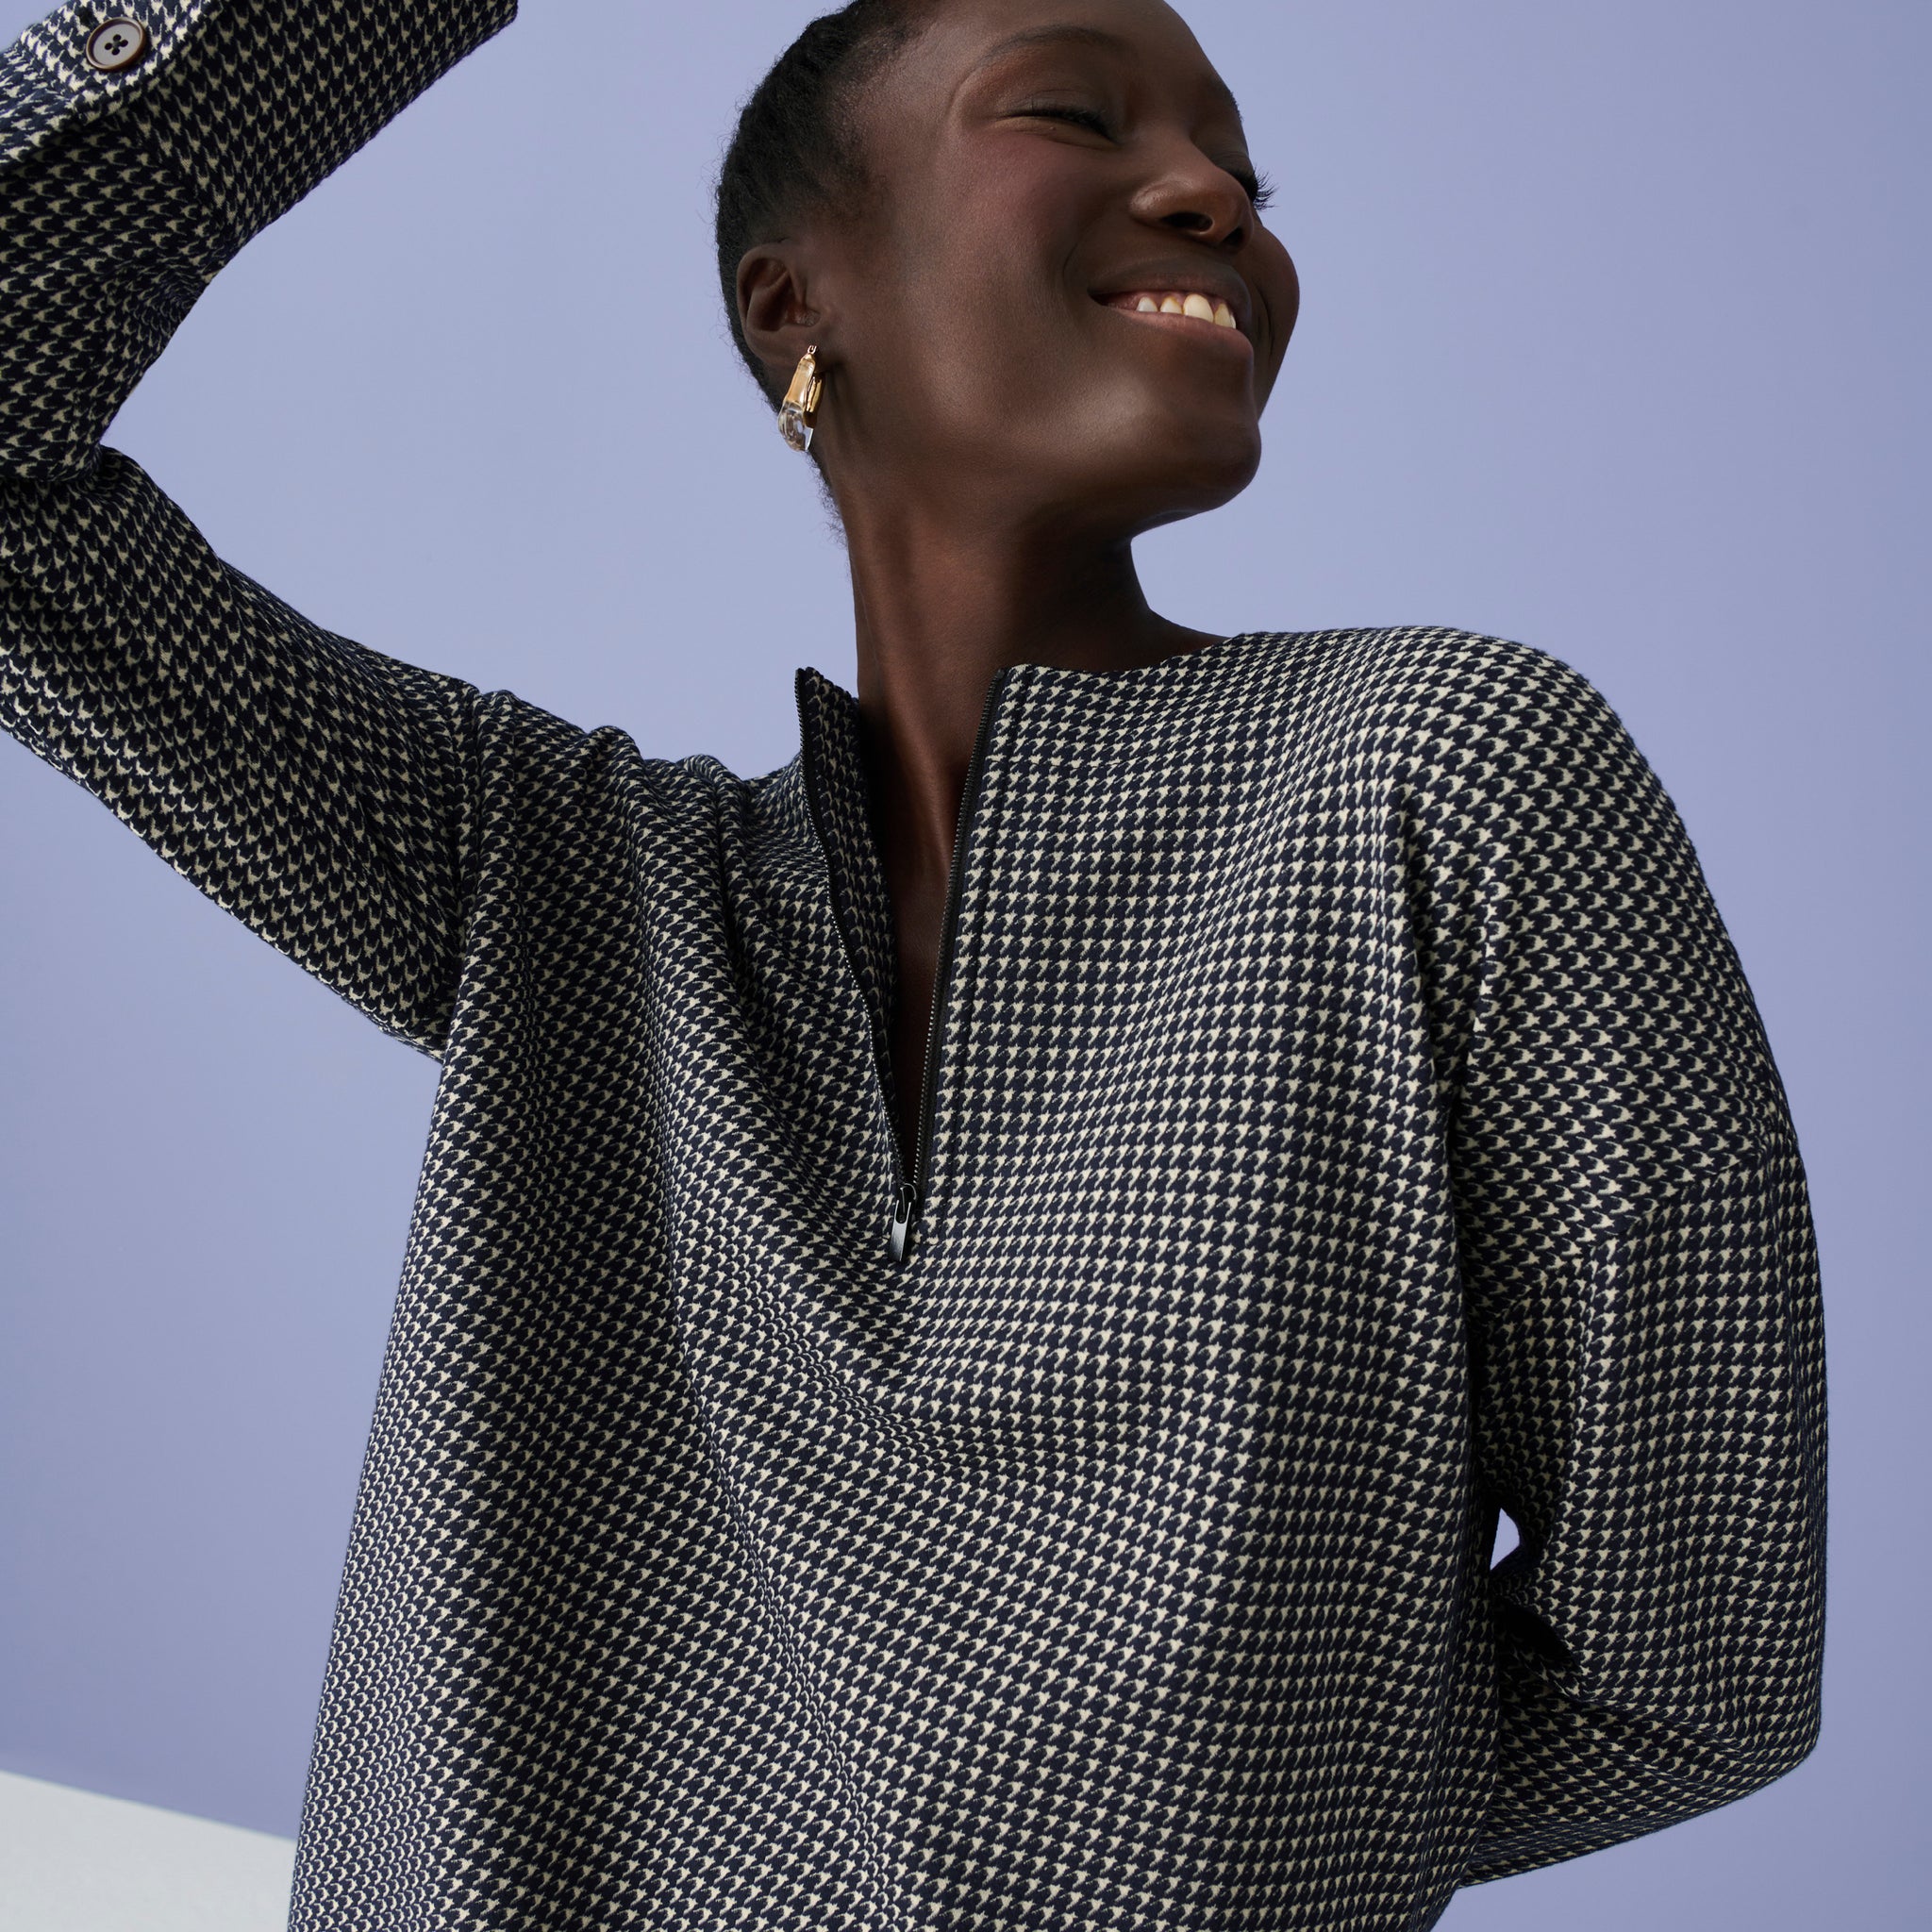 Image of a woman in the Tully Top in Houndstooth with her arm up